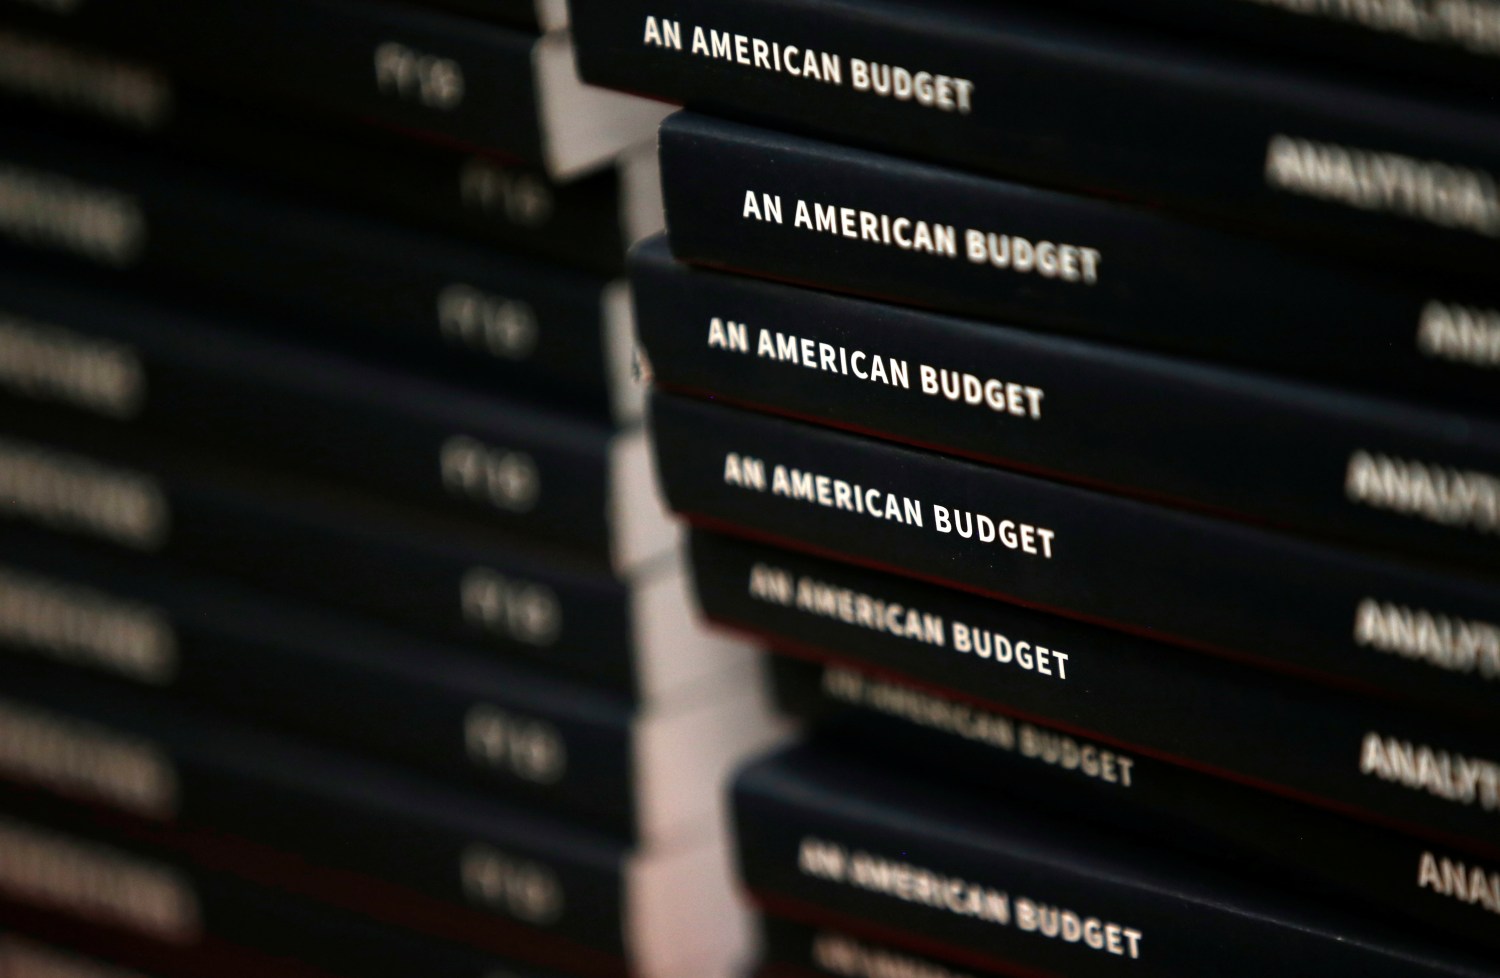 New copies of President Donald Trump's Budget for the U.S. Government for the Fiscal Year 2019 lay on a display table at the U.S. Government Publishing Office.